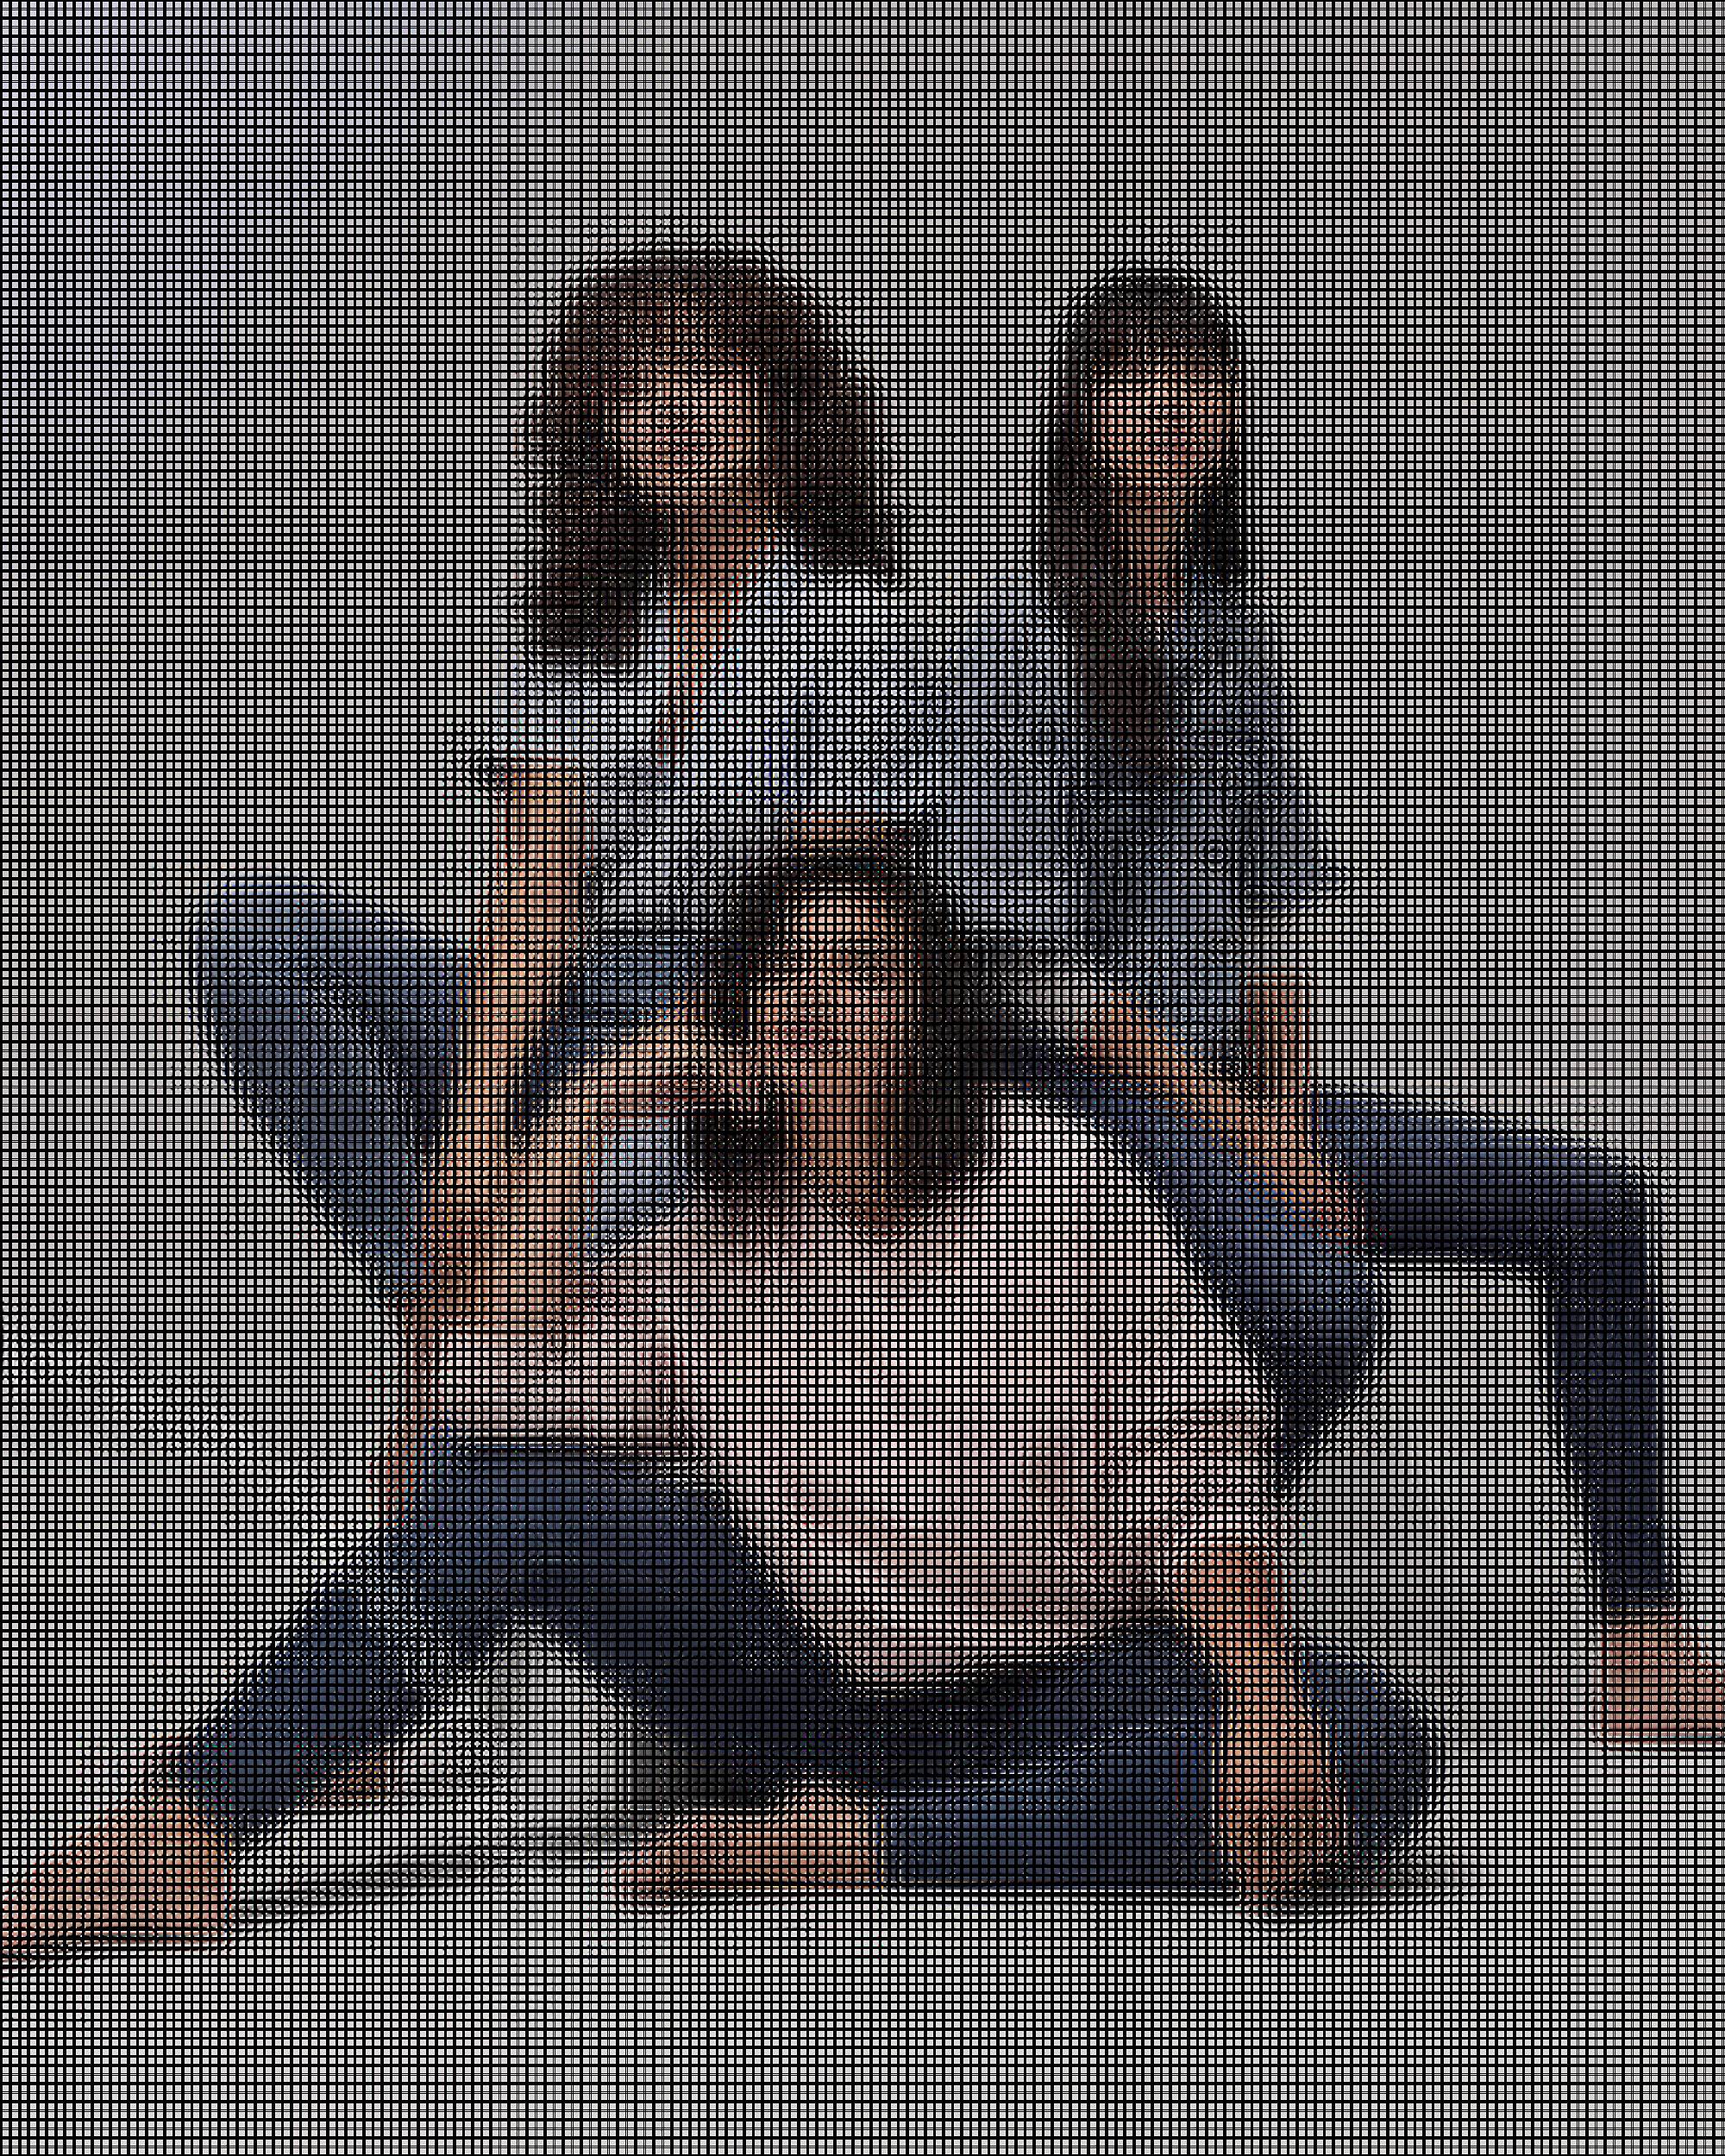 Three women sitting together wearing Levi's Sculpt jeans